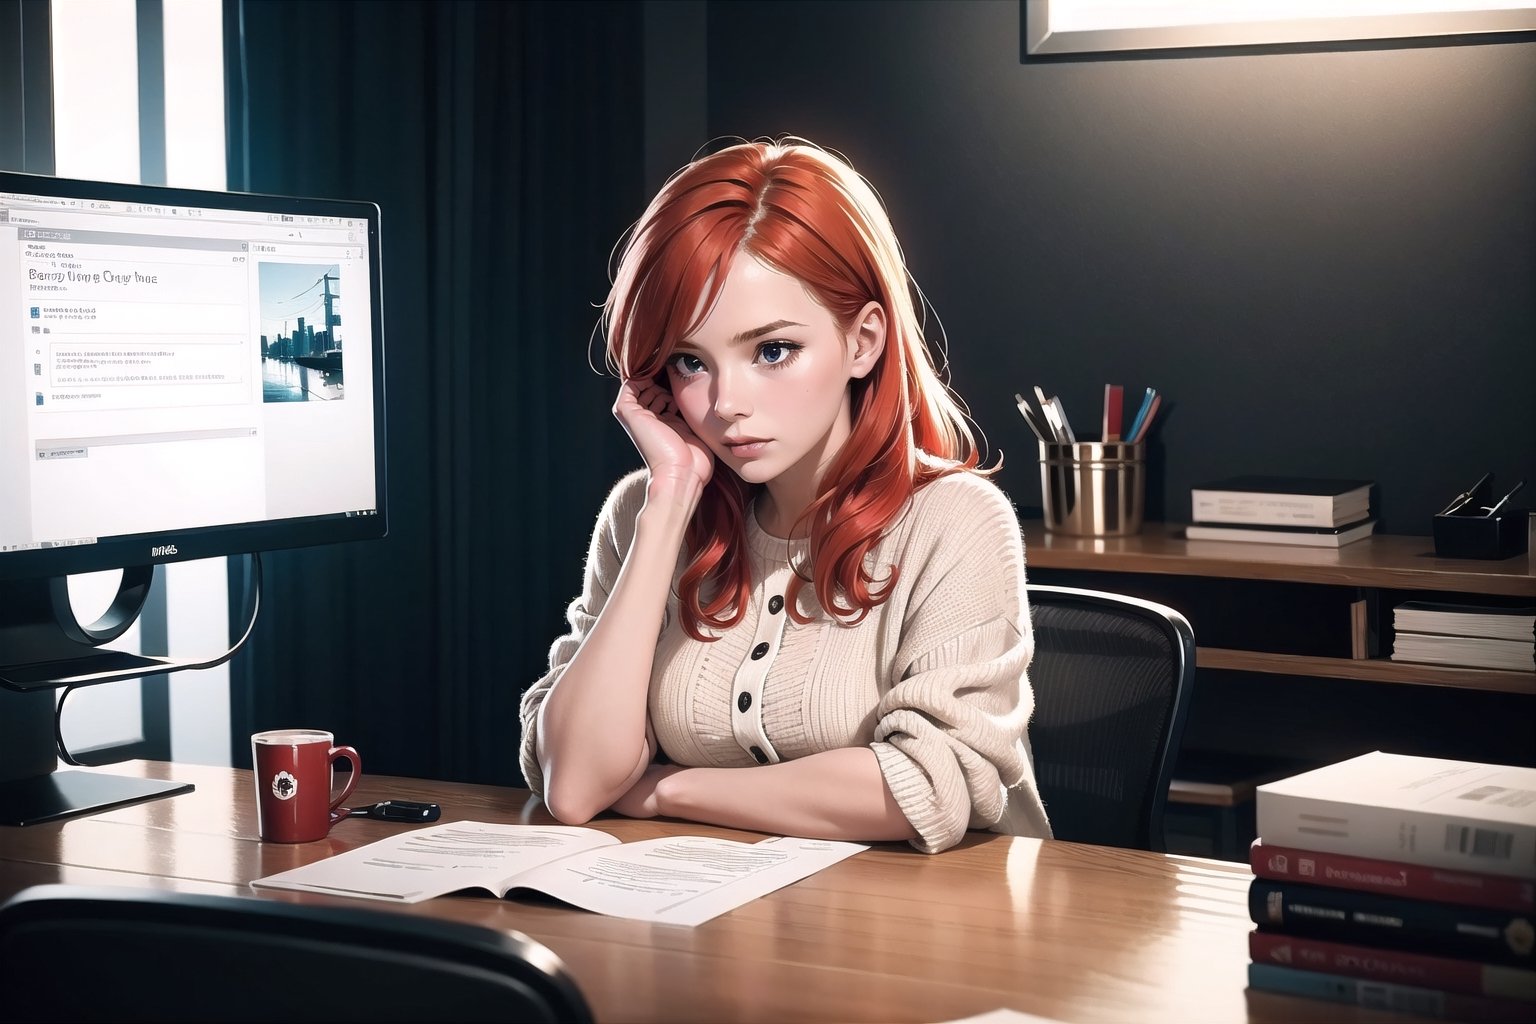  A delicate-featured Norwegian girl with fiery red hair sat at her desk with a frown on her face. She was thinking hard in front of the computer. She had a PPT for tomorrow's meeting that she hadn't finished yet. It was already late at night, and she was the only one in the office still working overtime. Outside the glass curtain wall behind her is the bustling night of the city, reflecting her hard work